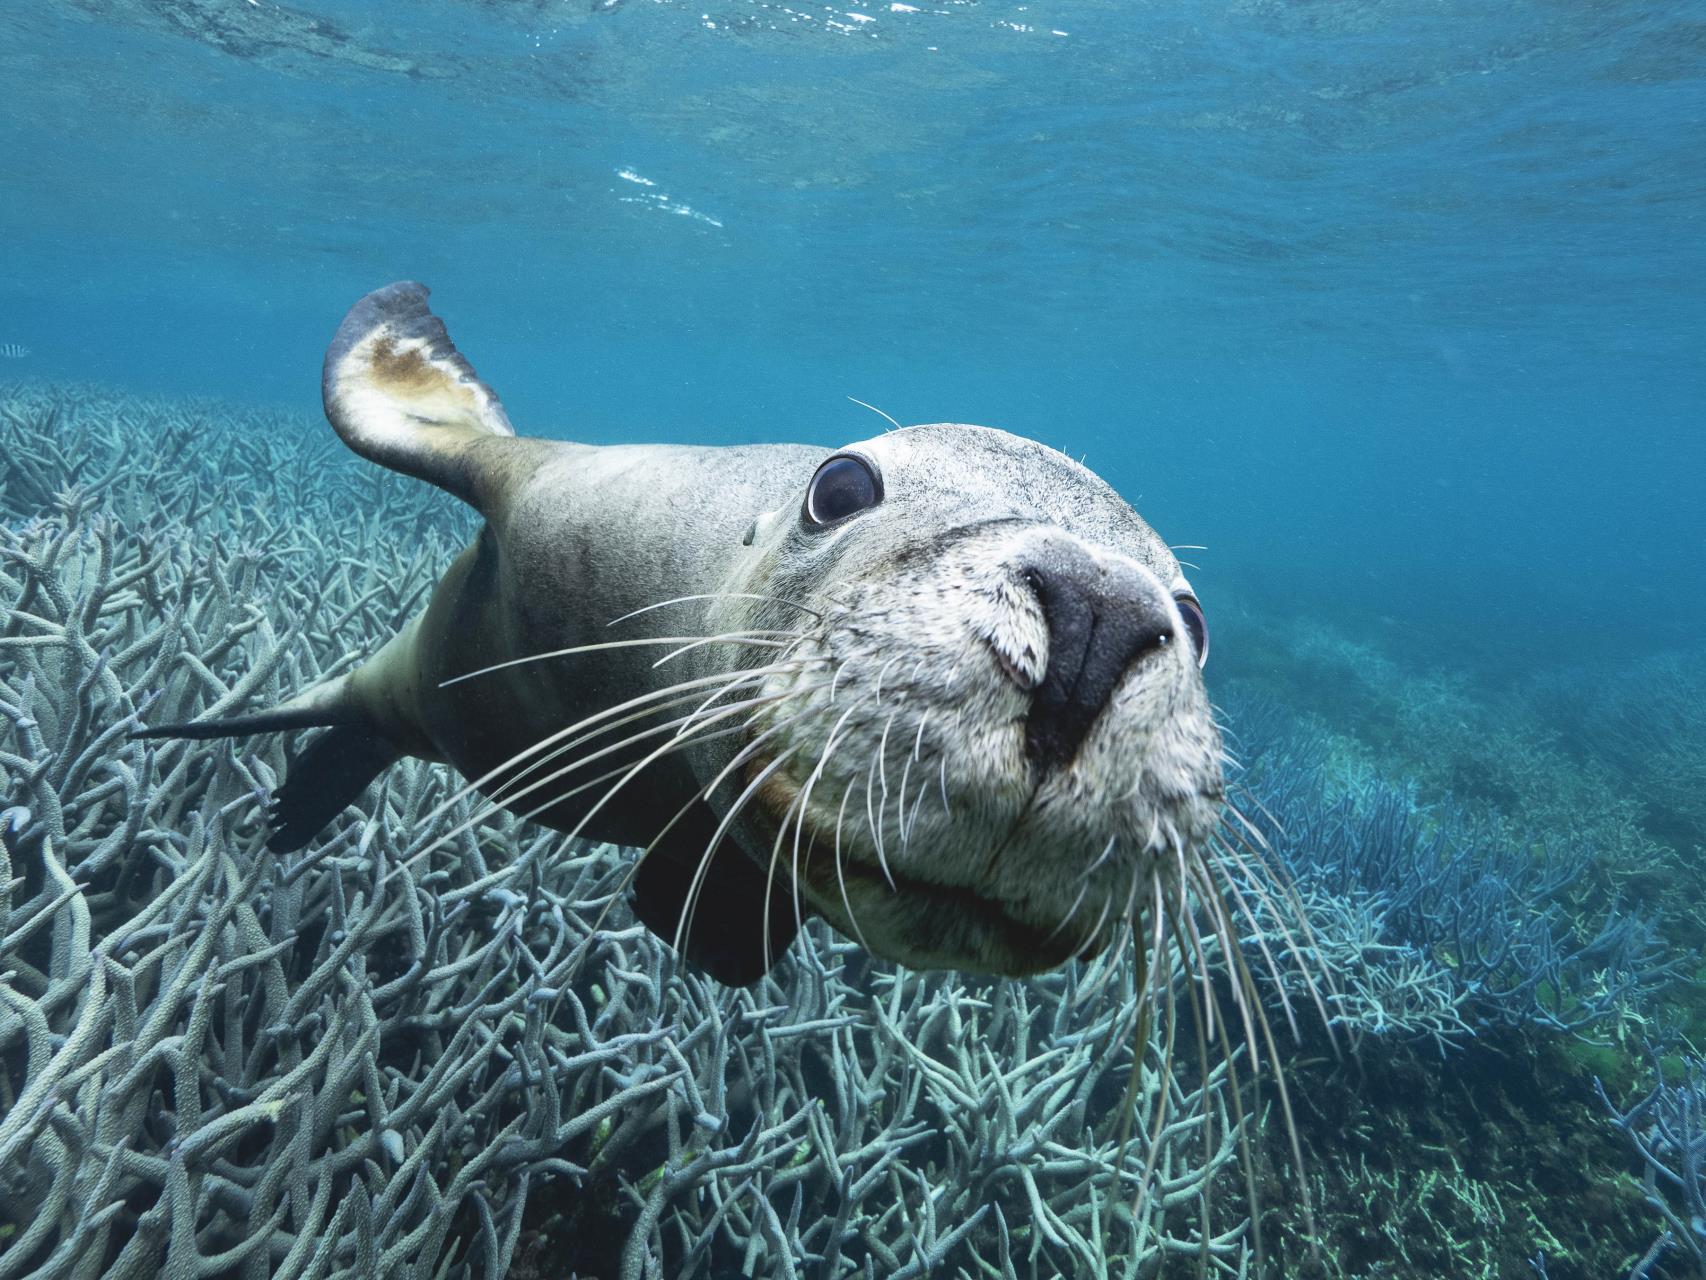 Seal at the Abrolhos Islands